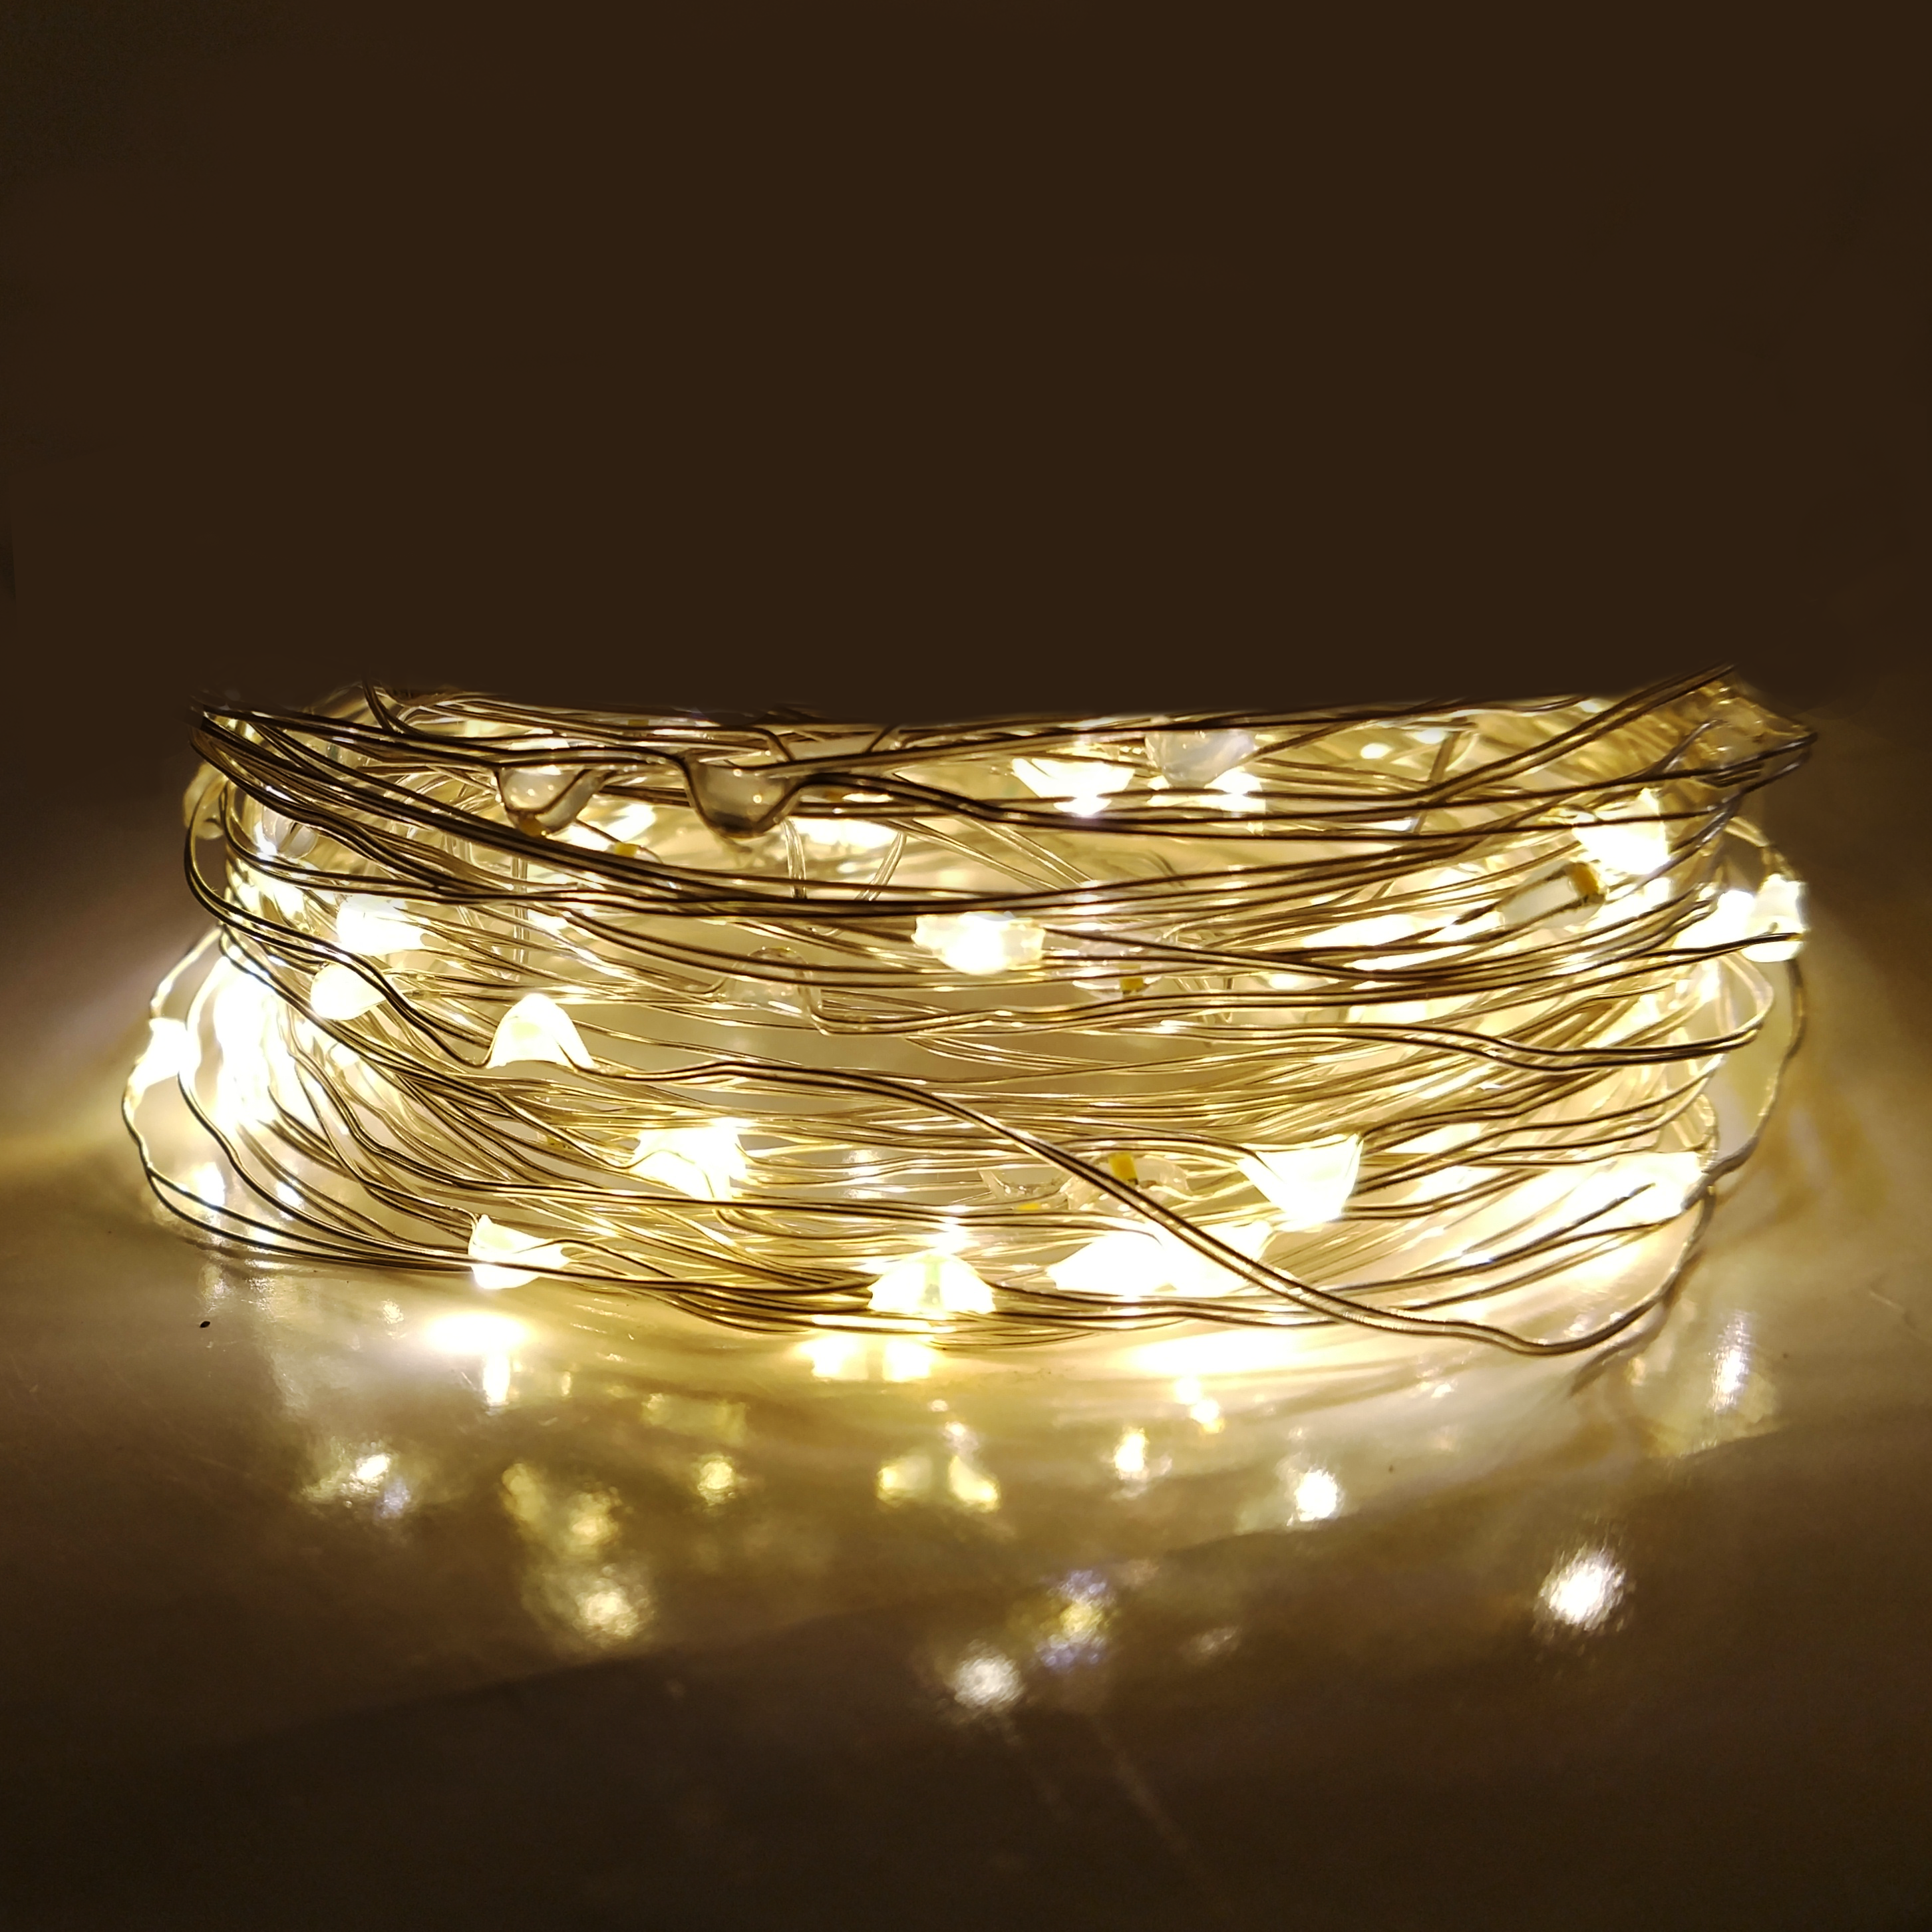 50LED String Light 20FT Micro Rice Wire Copper Fairy Xmas Party Light Warm White 